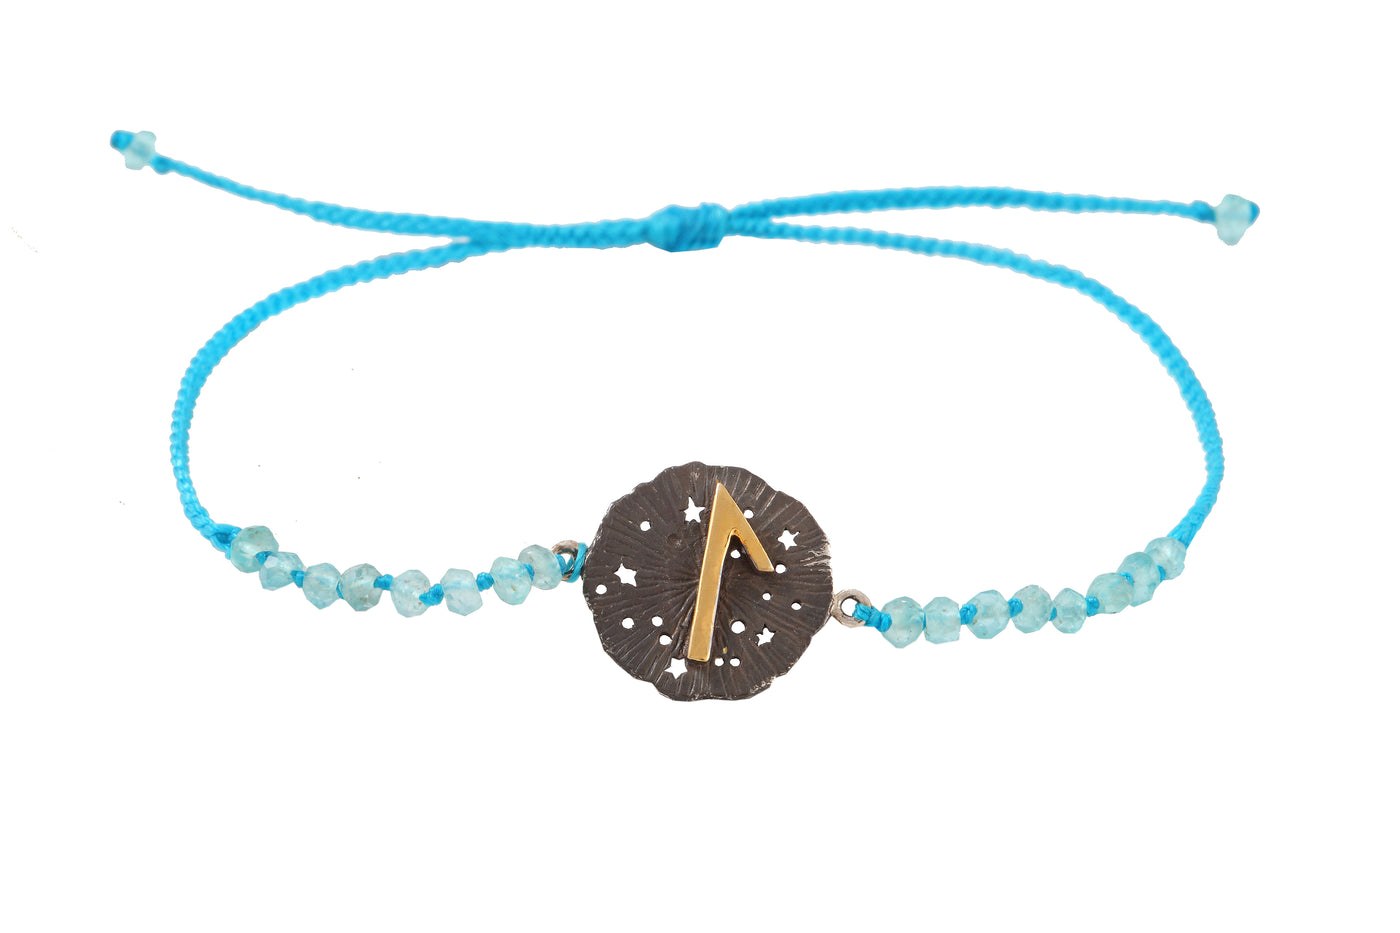 Runic medallion amulet Laguz bracelet with beads. Gold plated and oxide